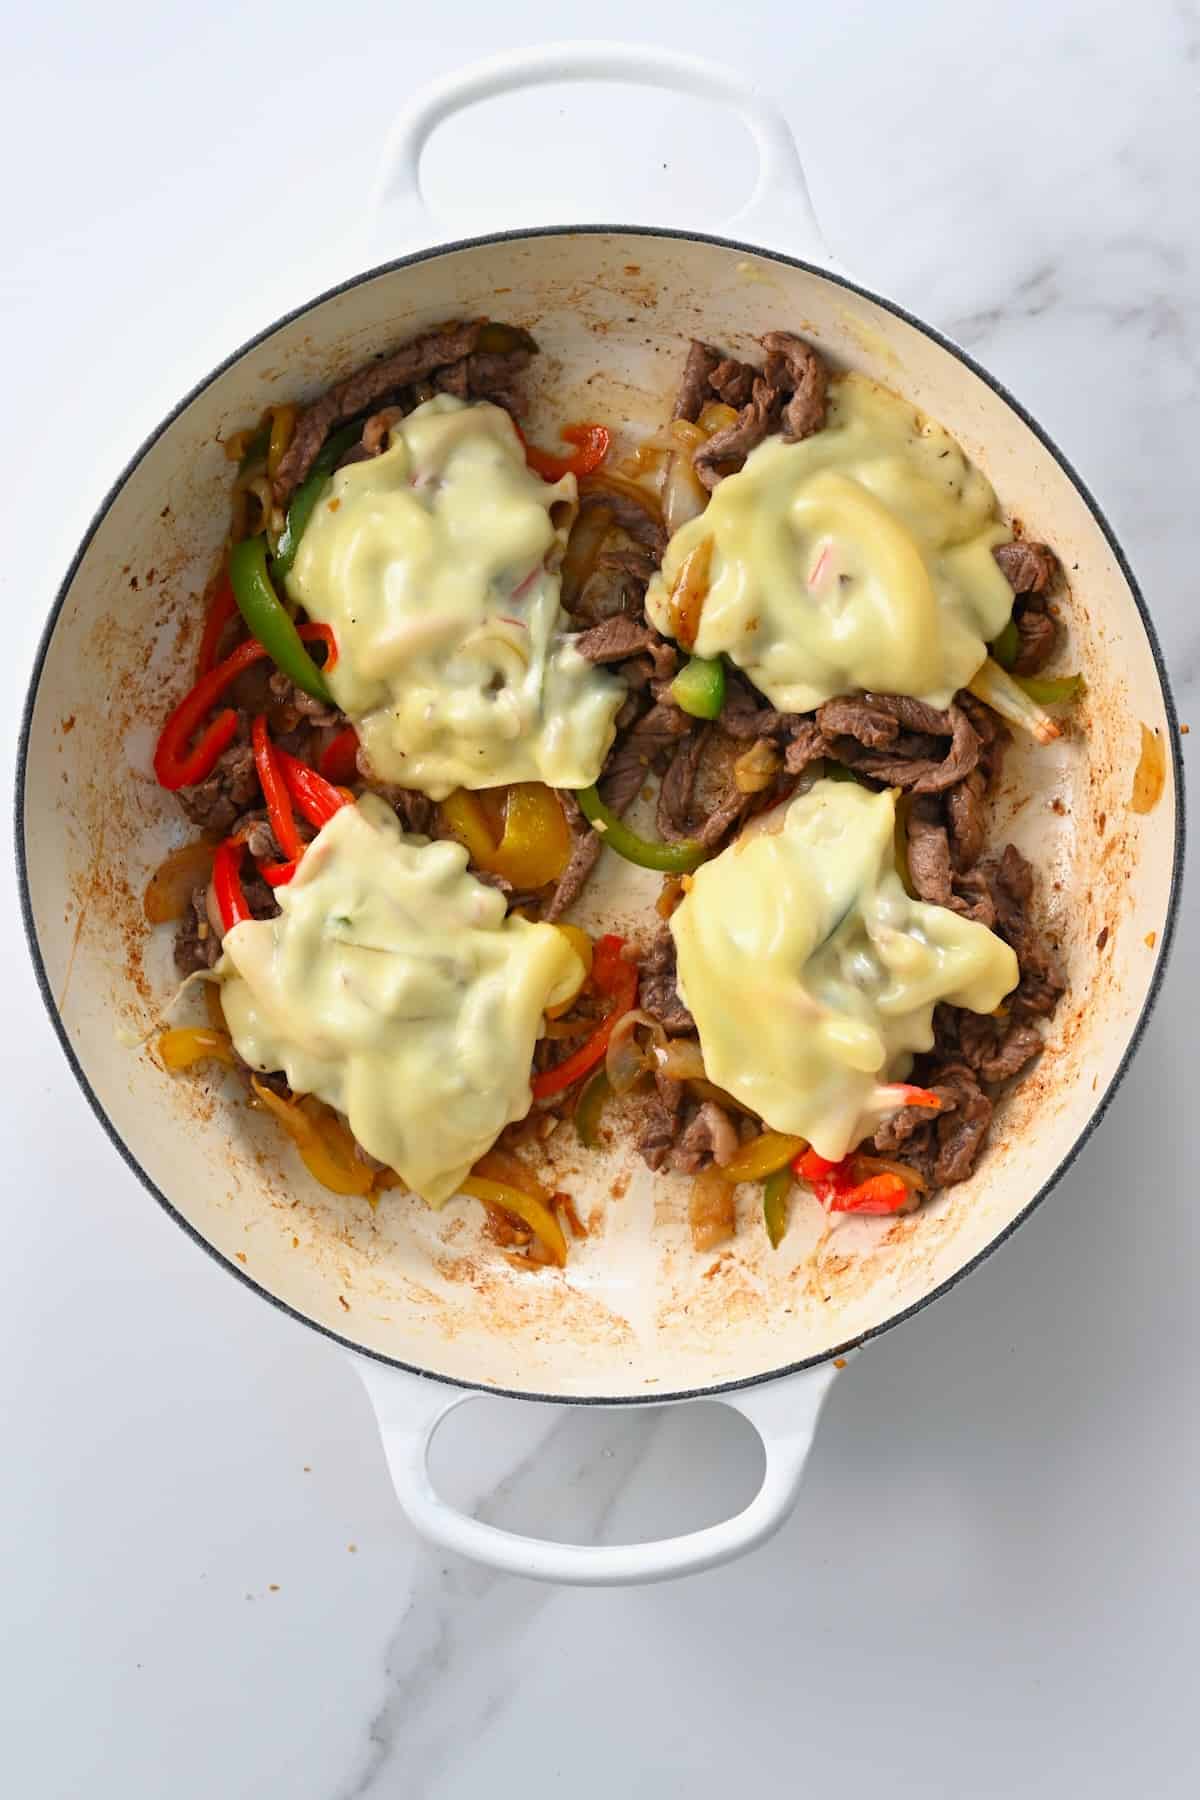 Cheese slices added over meat patties in a pan